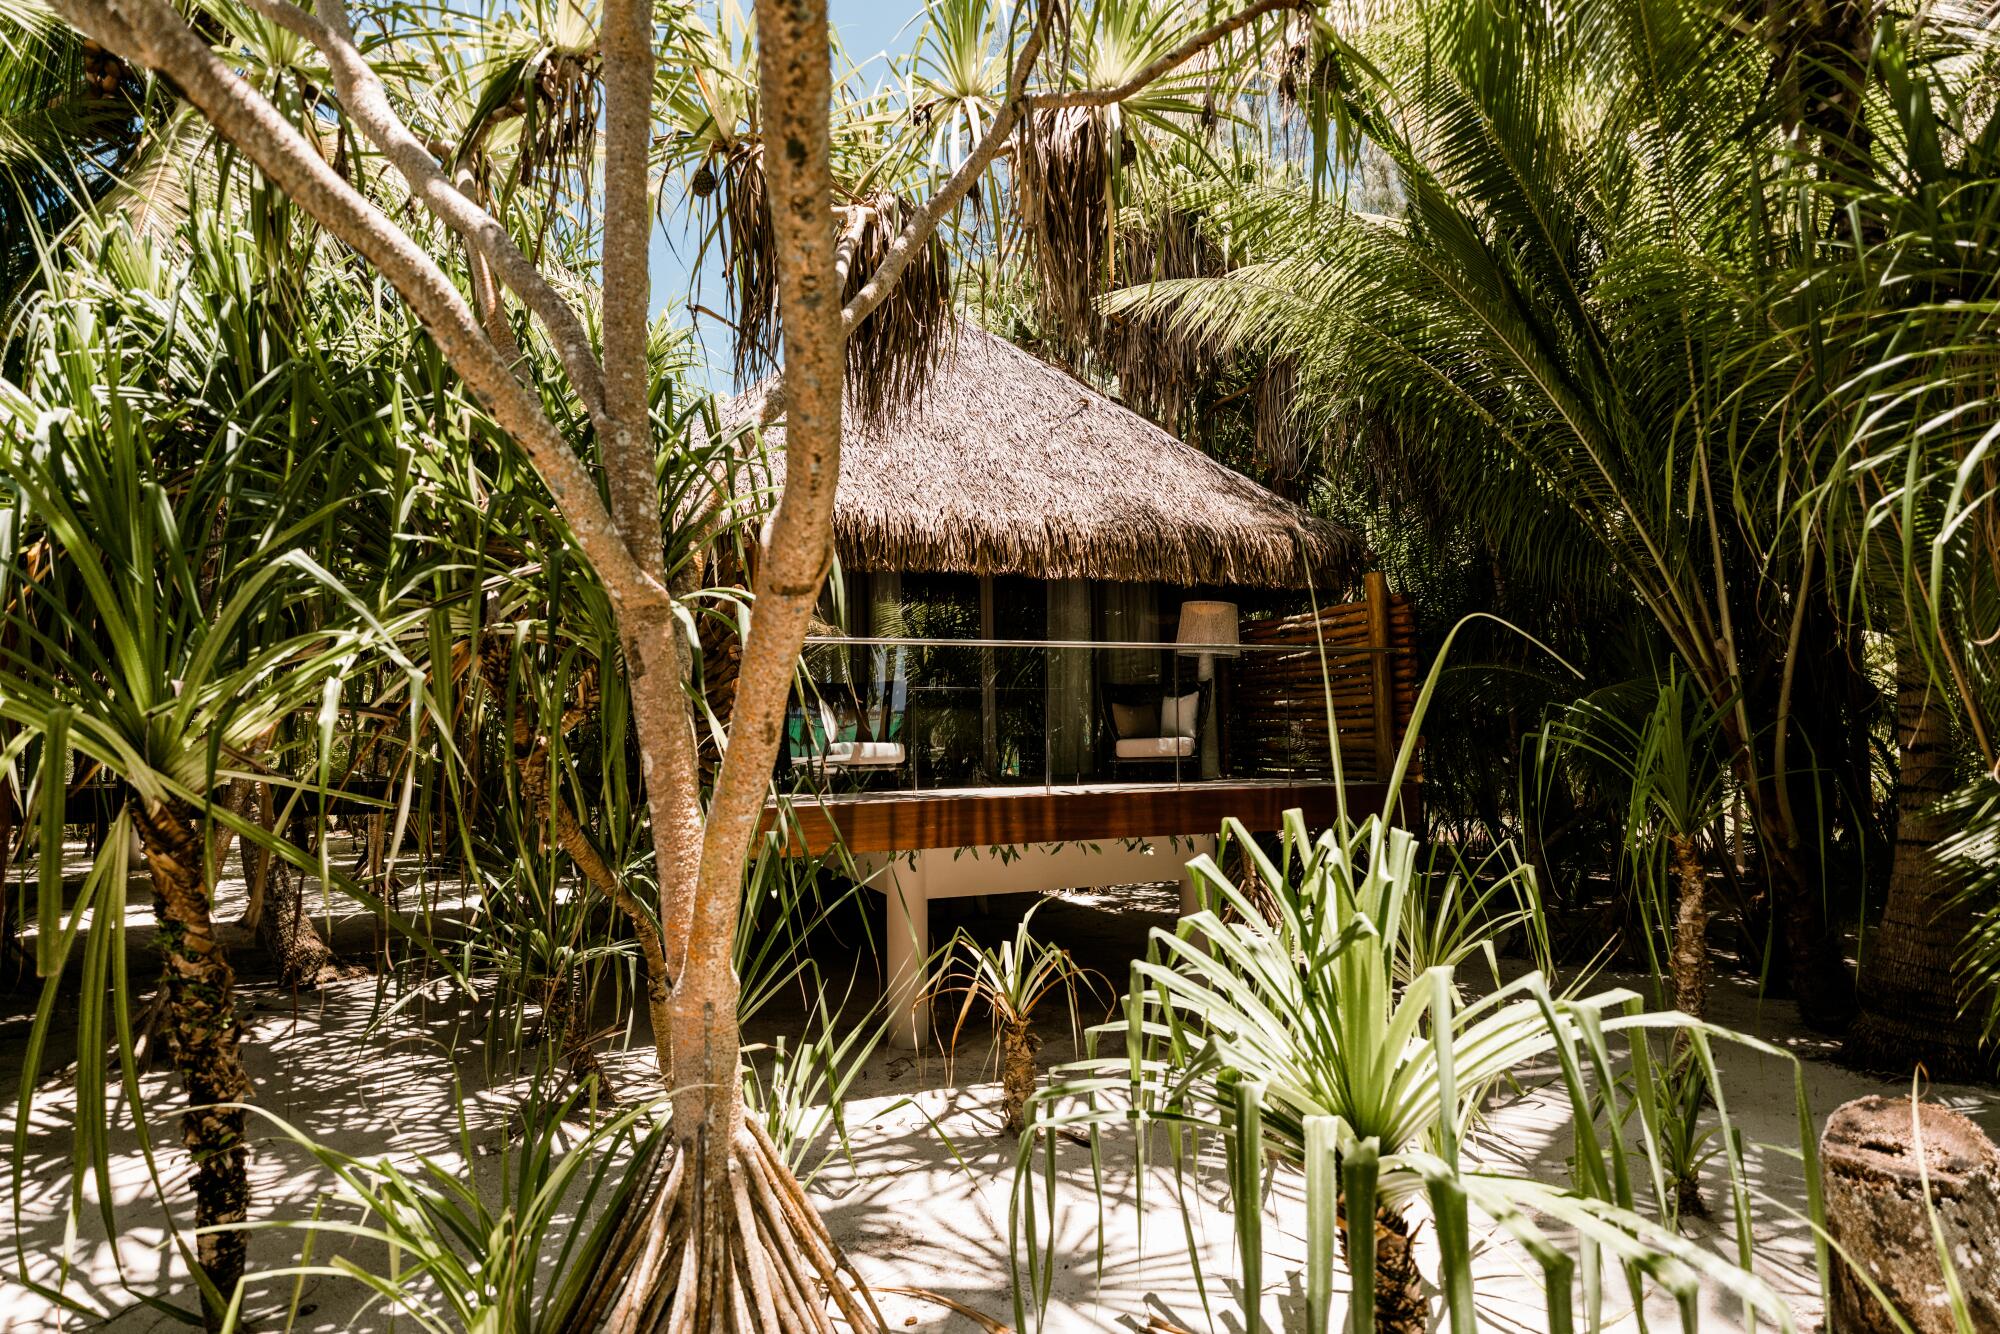 A villa with a thatched roof stands raised above the sand among palms and other trees.